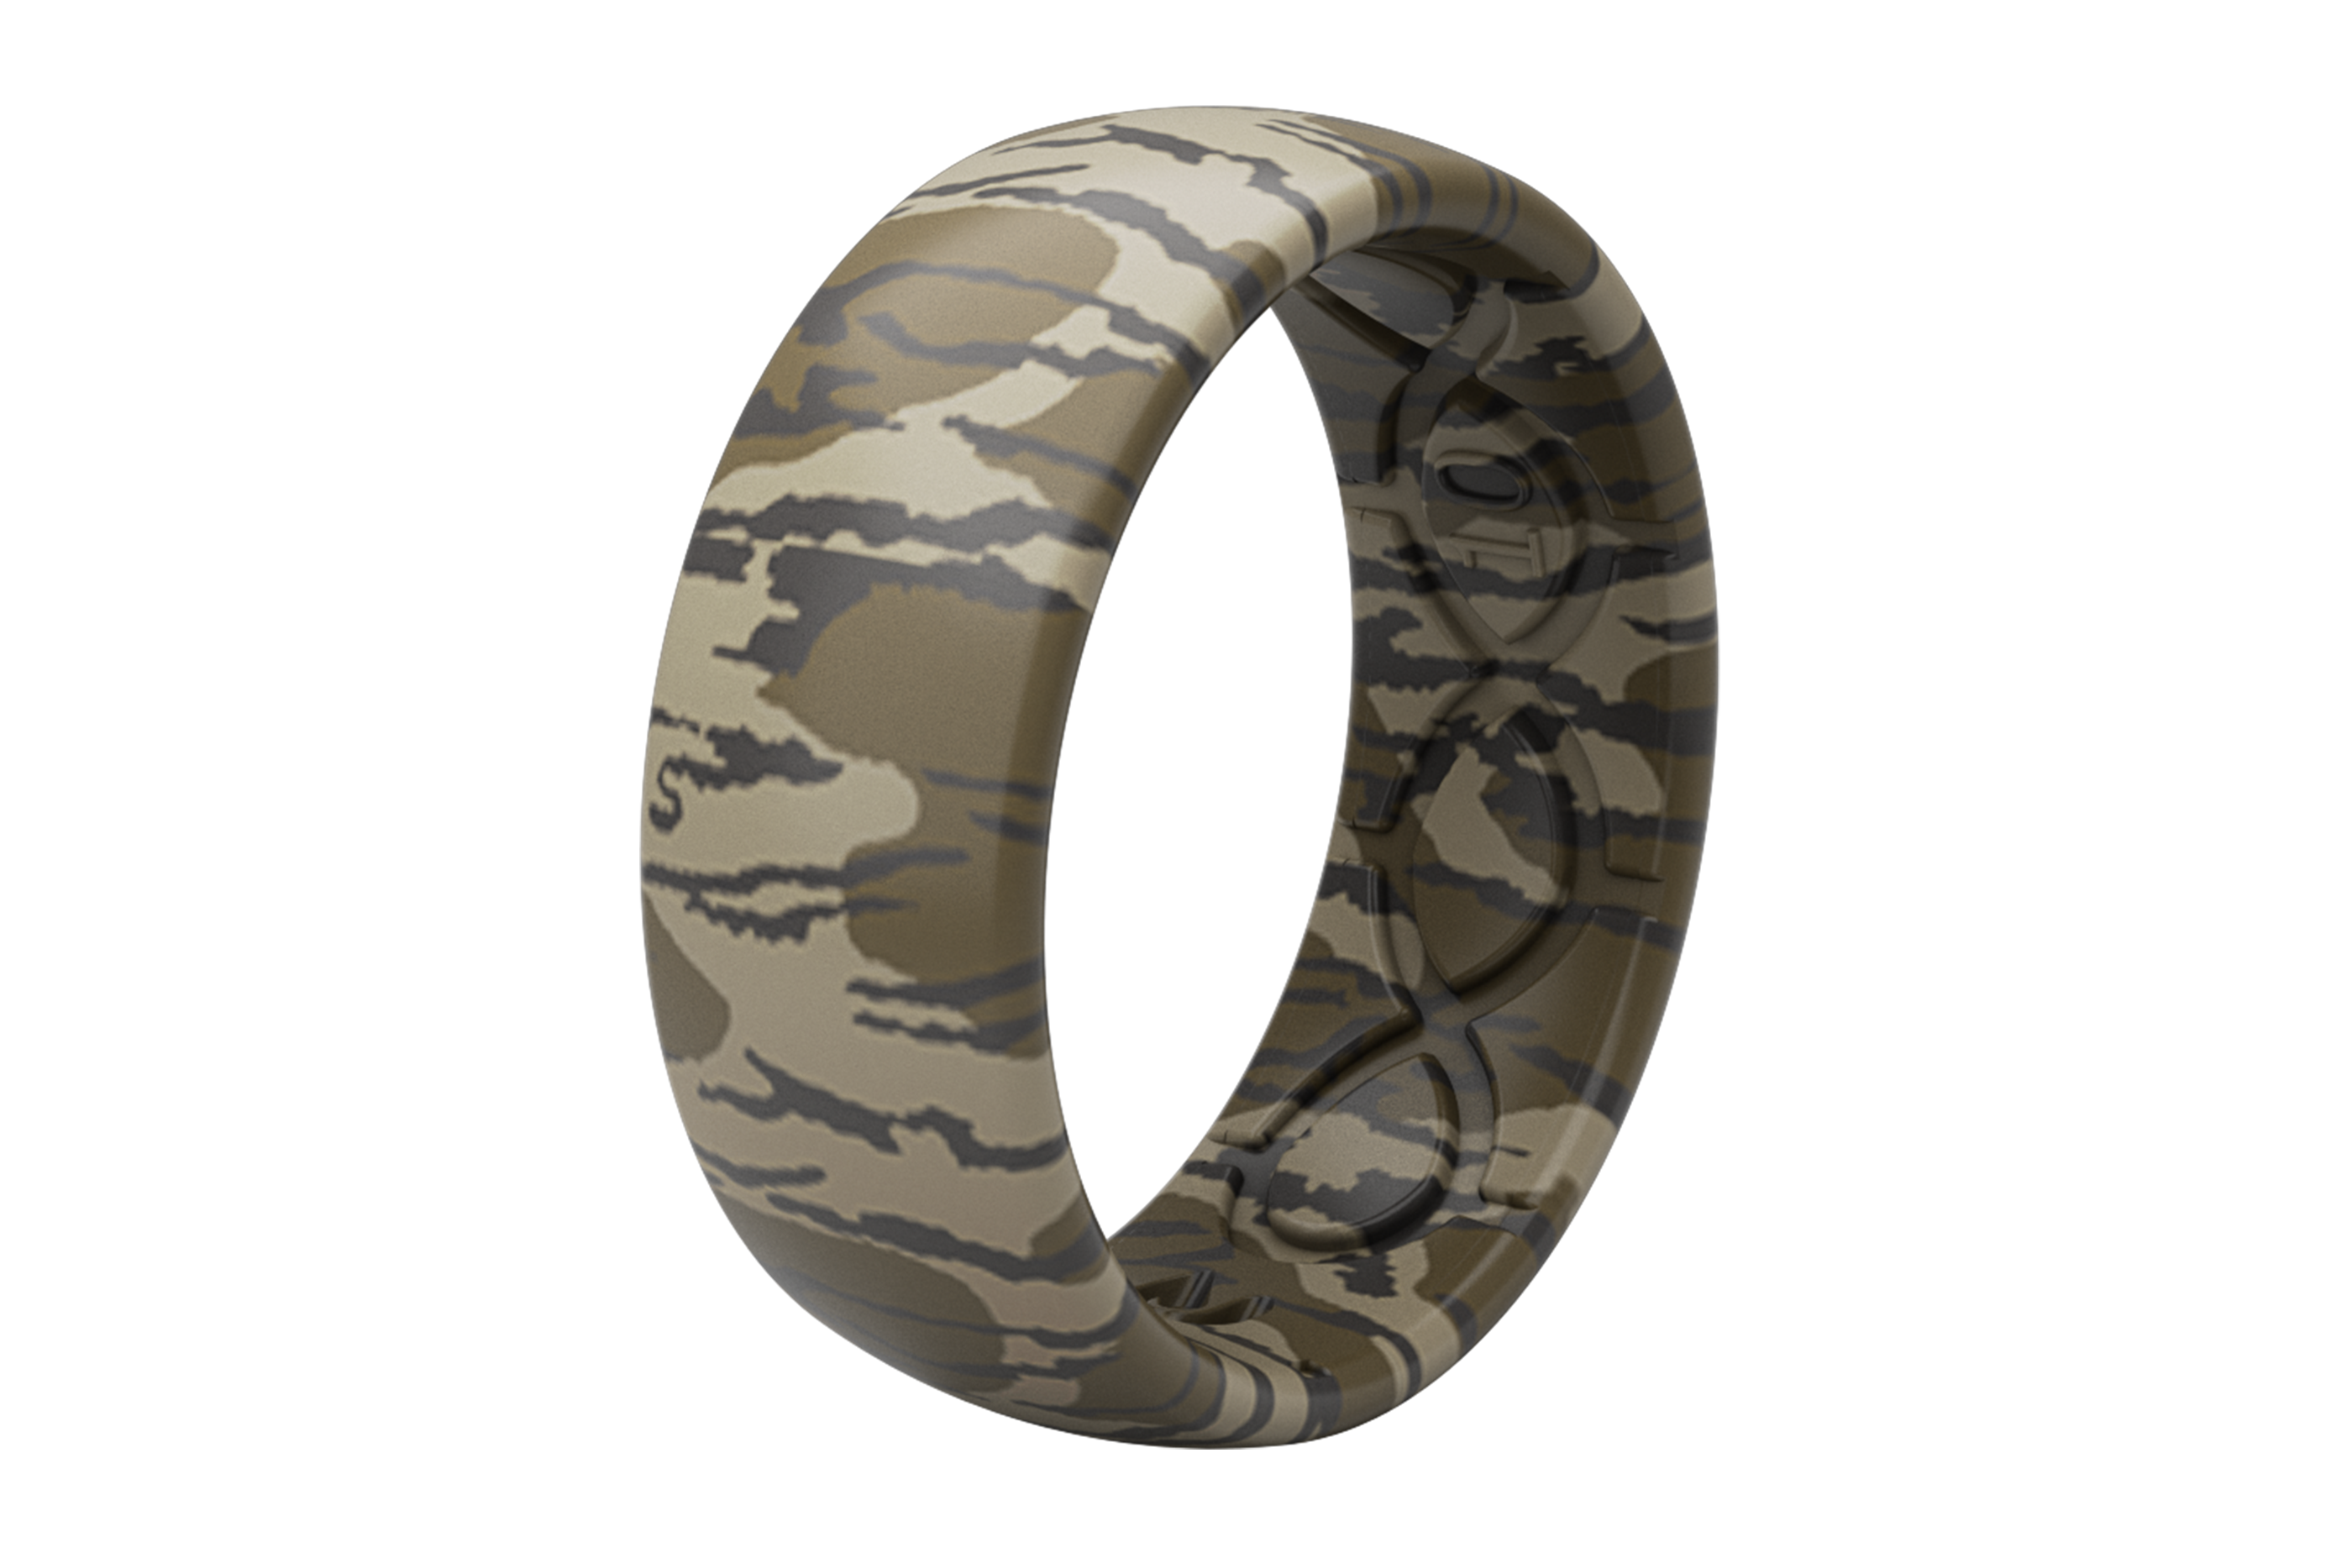 Scope Ring & Base Combo Pack-High Rings & 1-Piece Base, Mossy Oak Break-Up  Camo A1789BU | Traditions® Performance Firearms